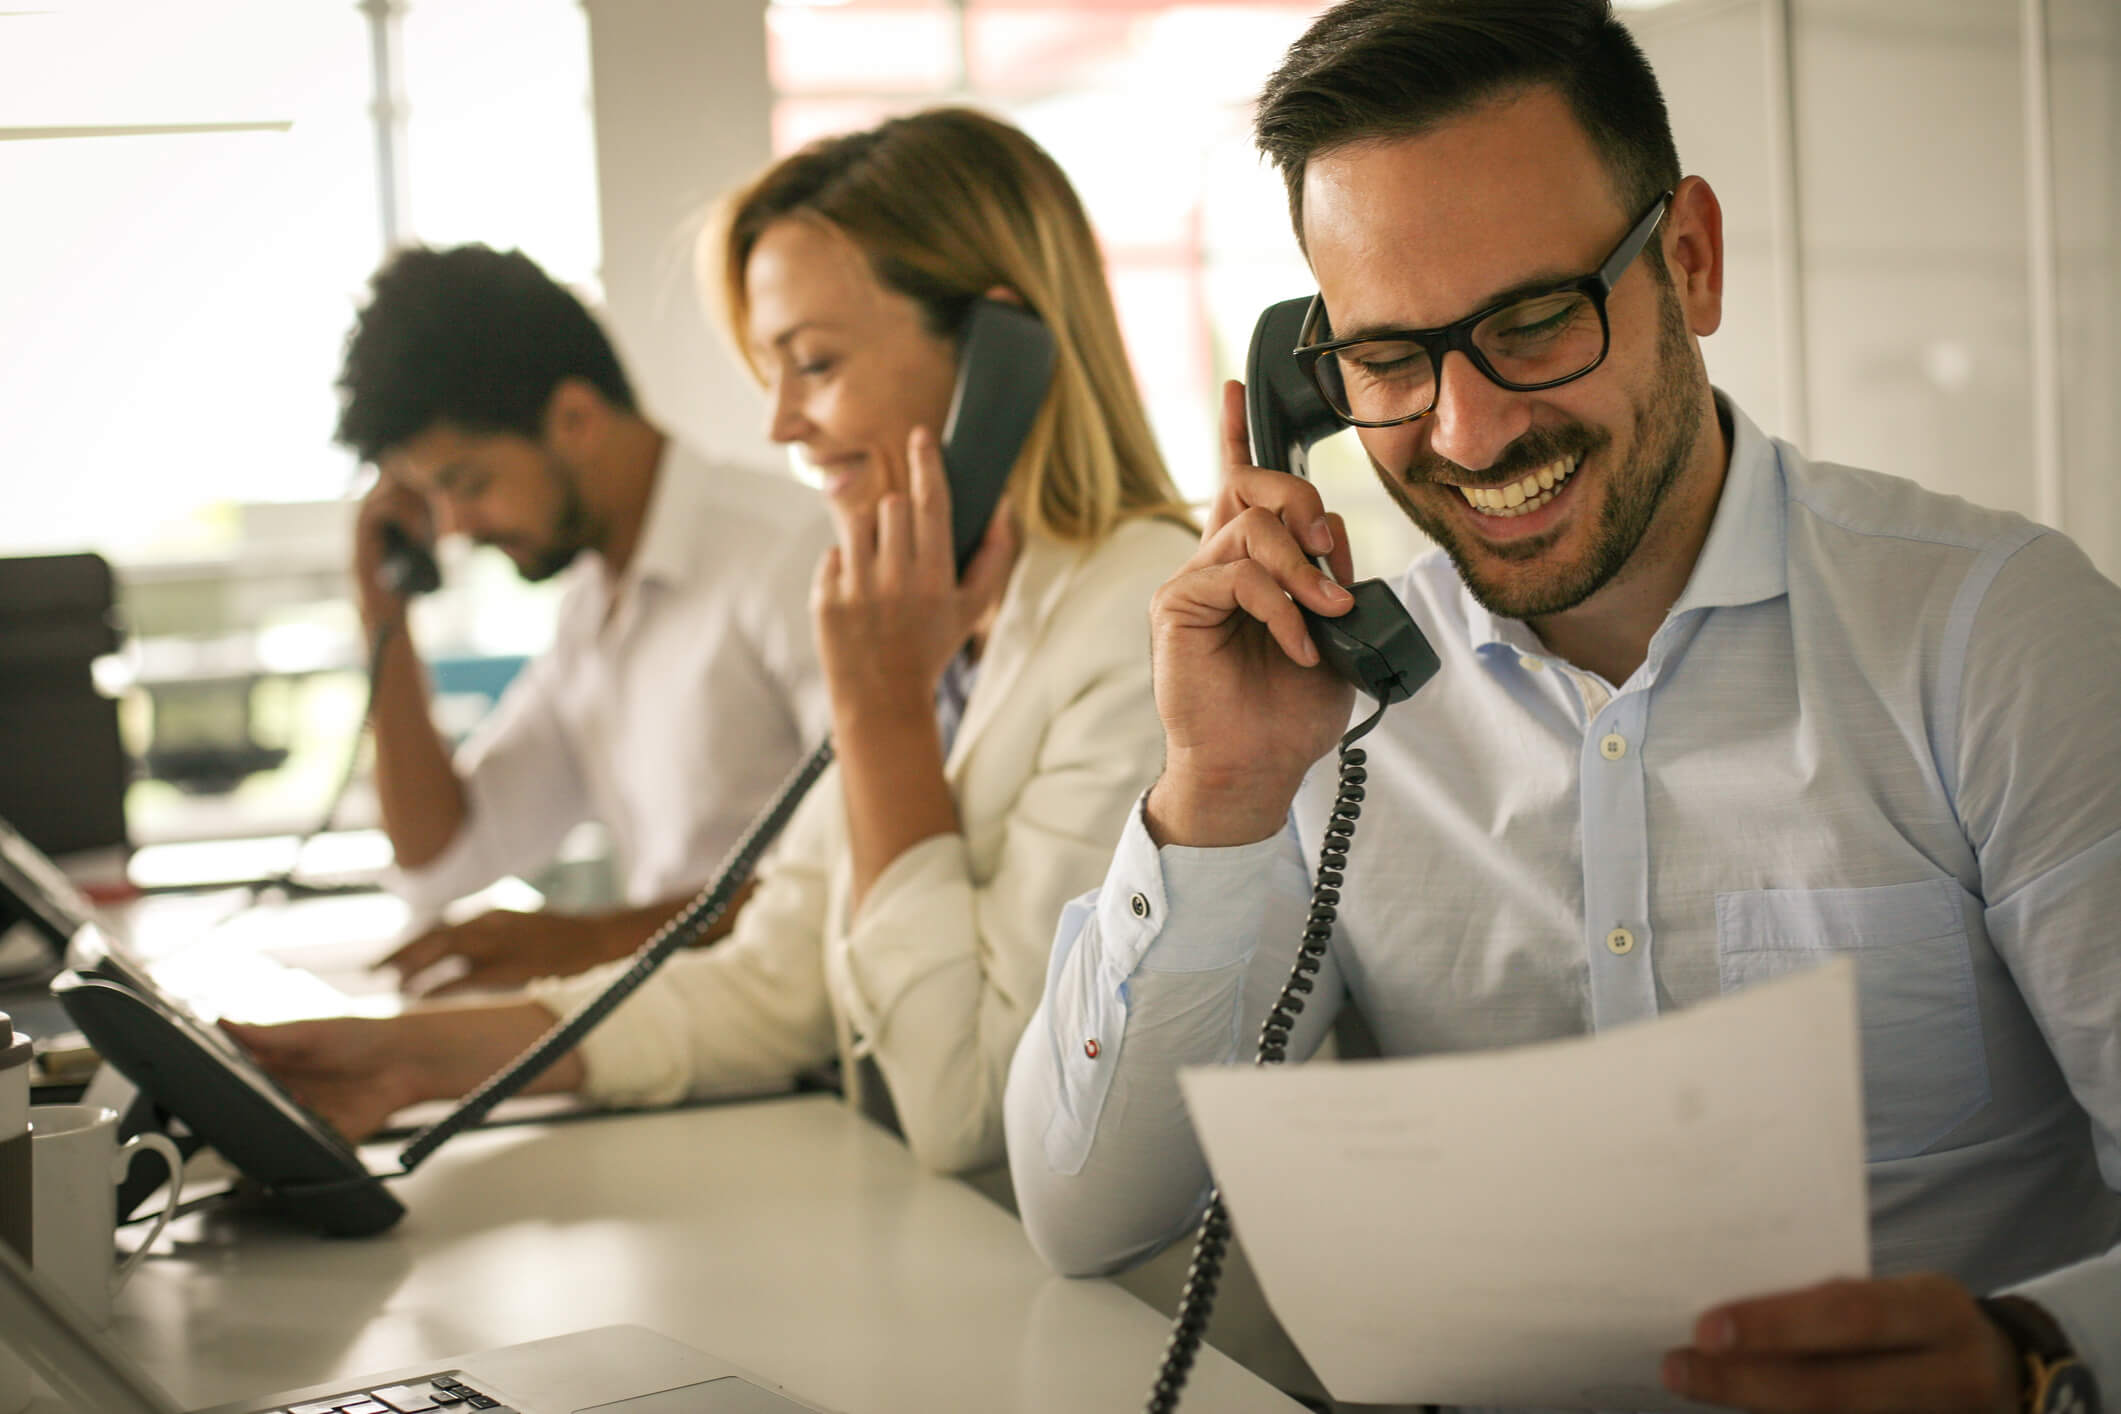 Why our phone answering service is so popular with small businesses